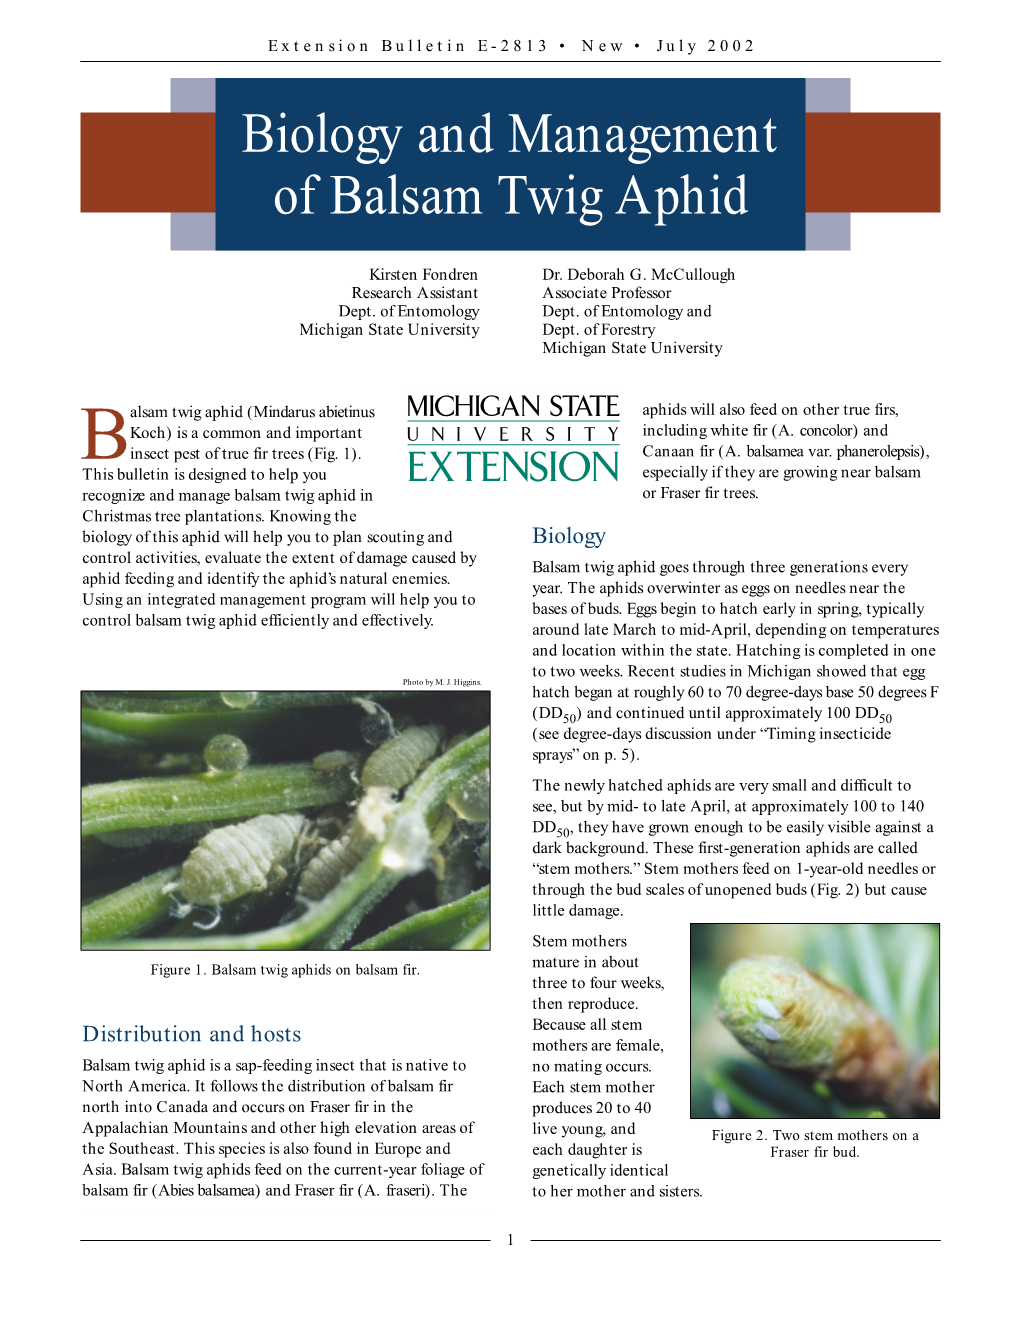 Biology and Management of Balsam Twig Aphid